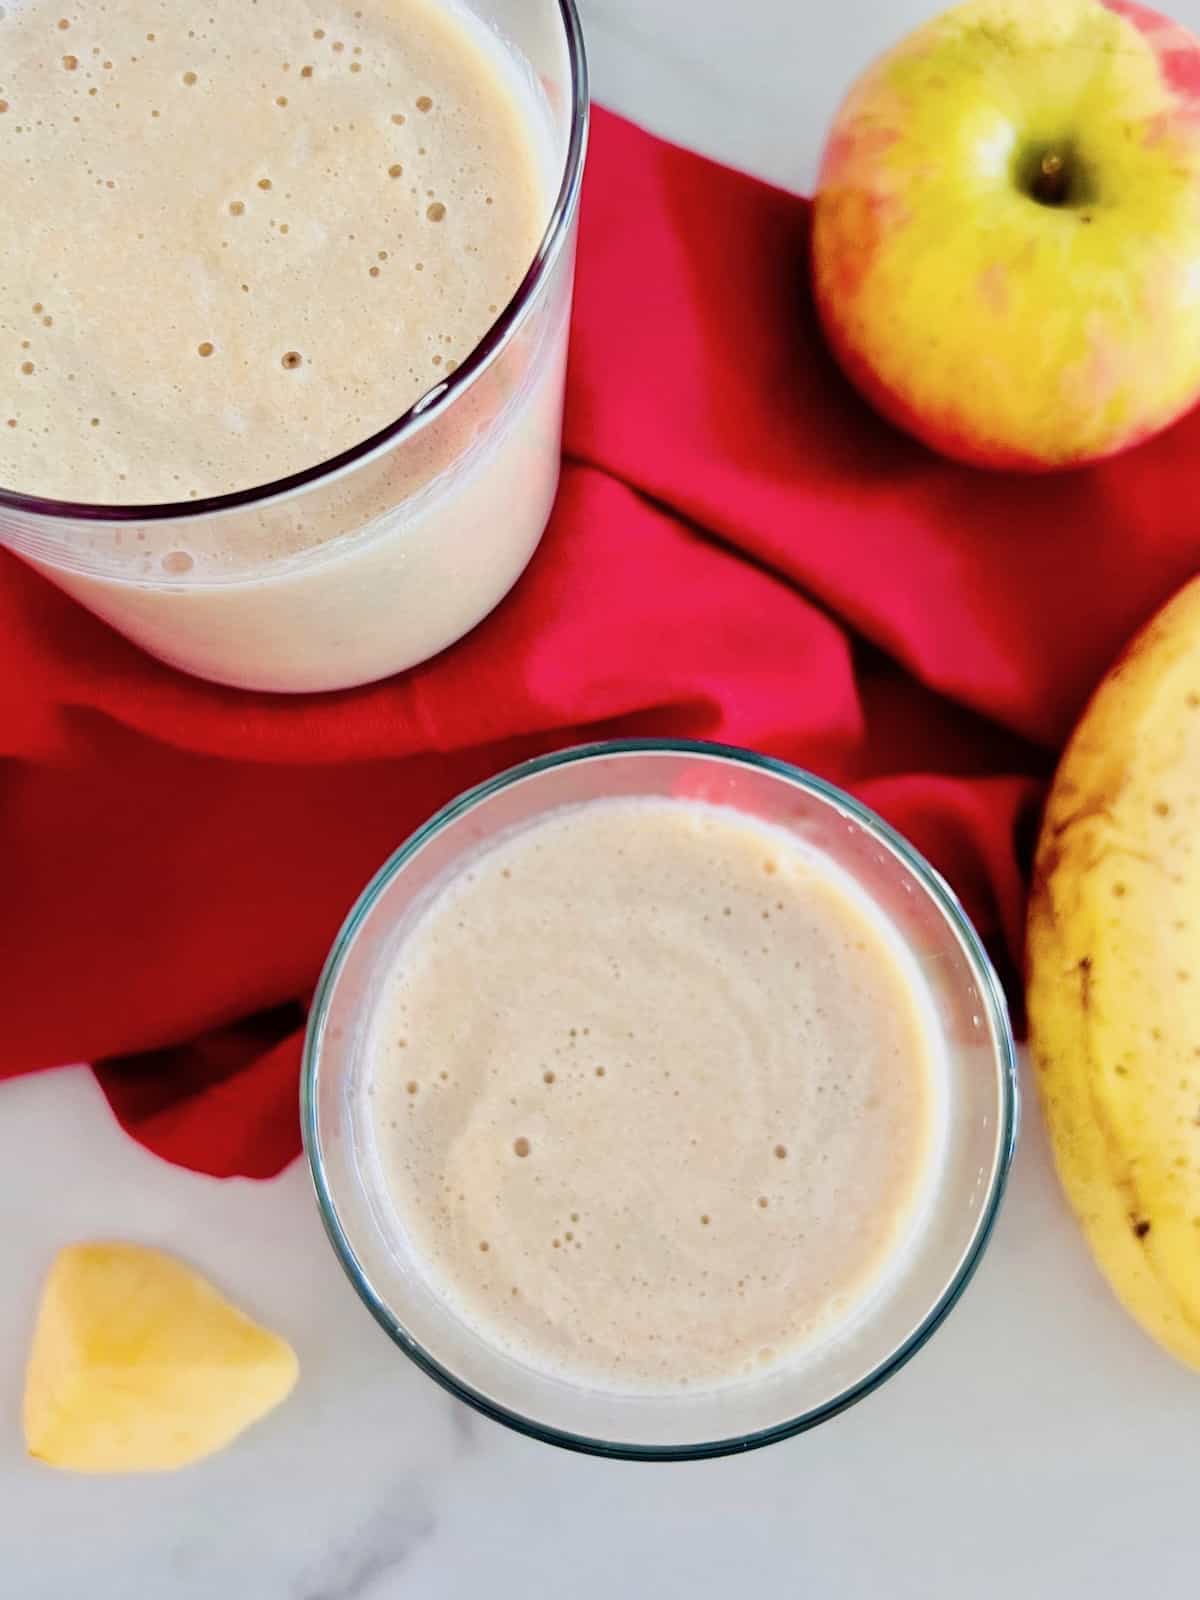 Smoothie in two glasses filled next to apple and banana and red napkin